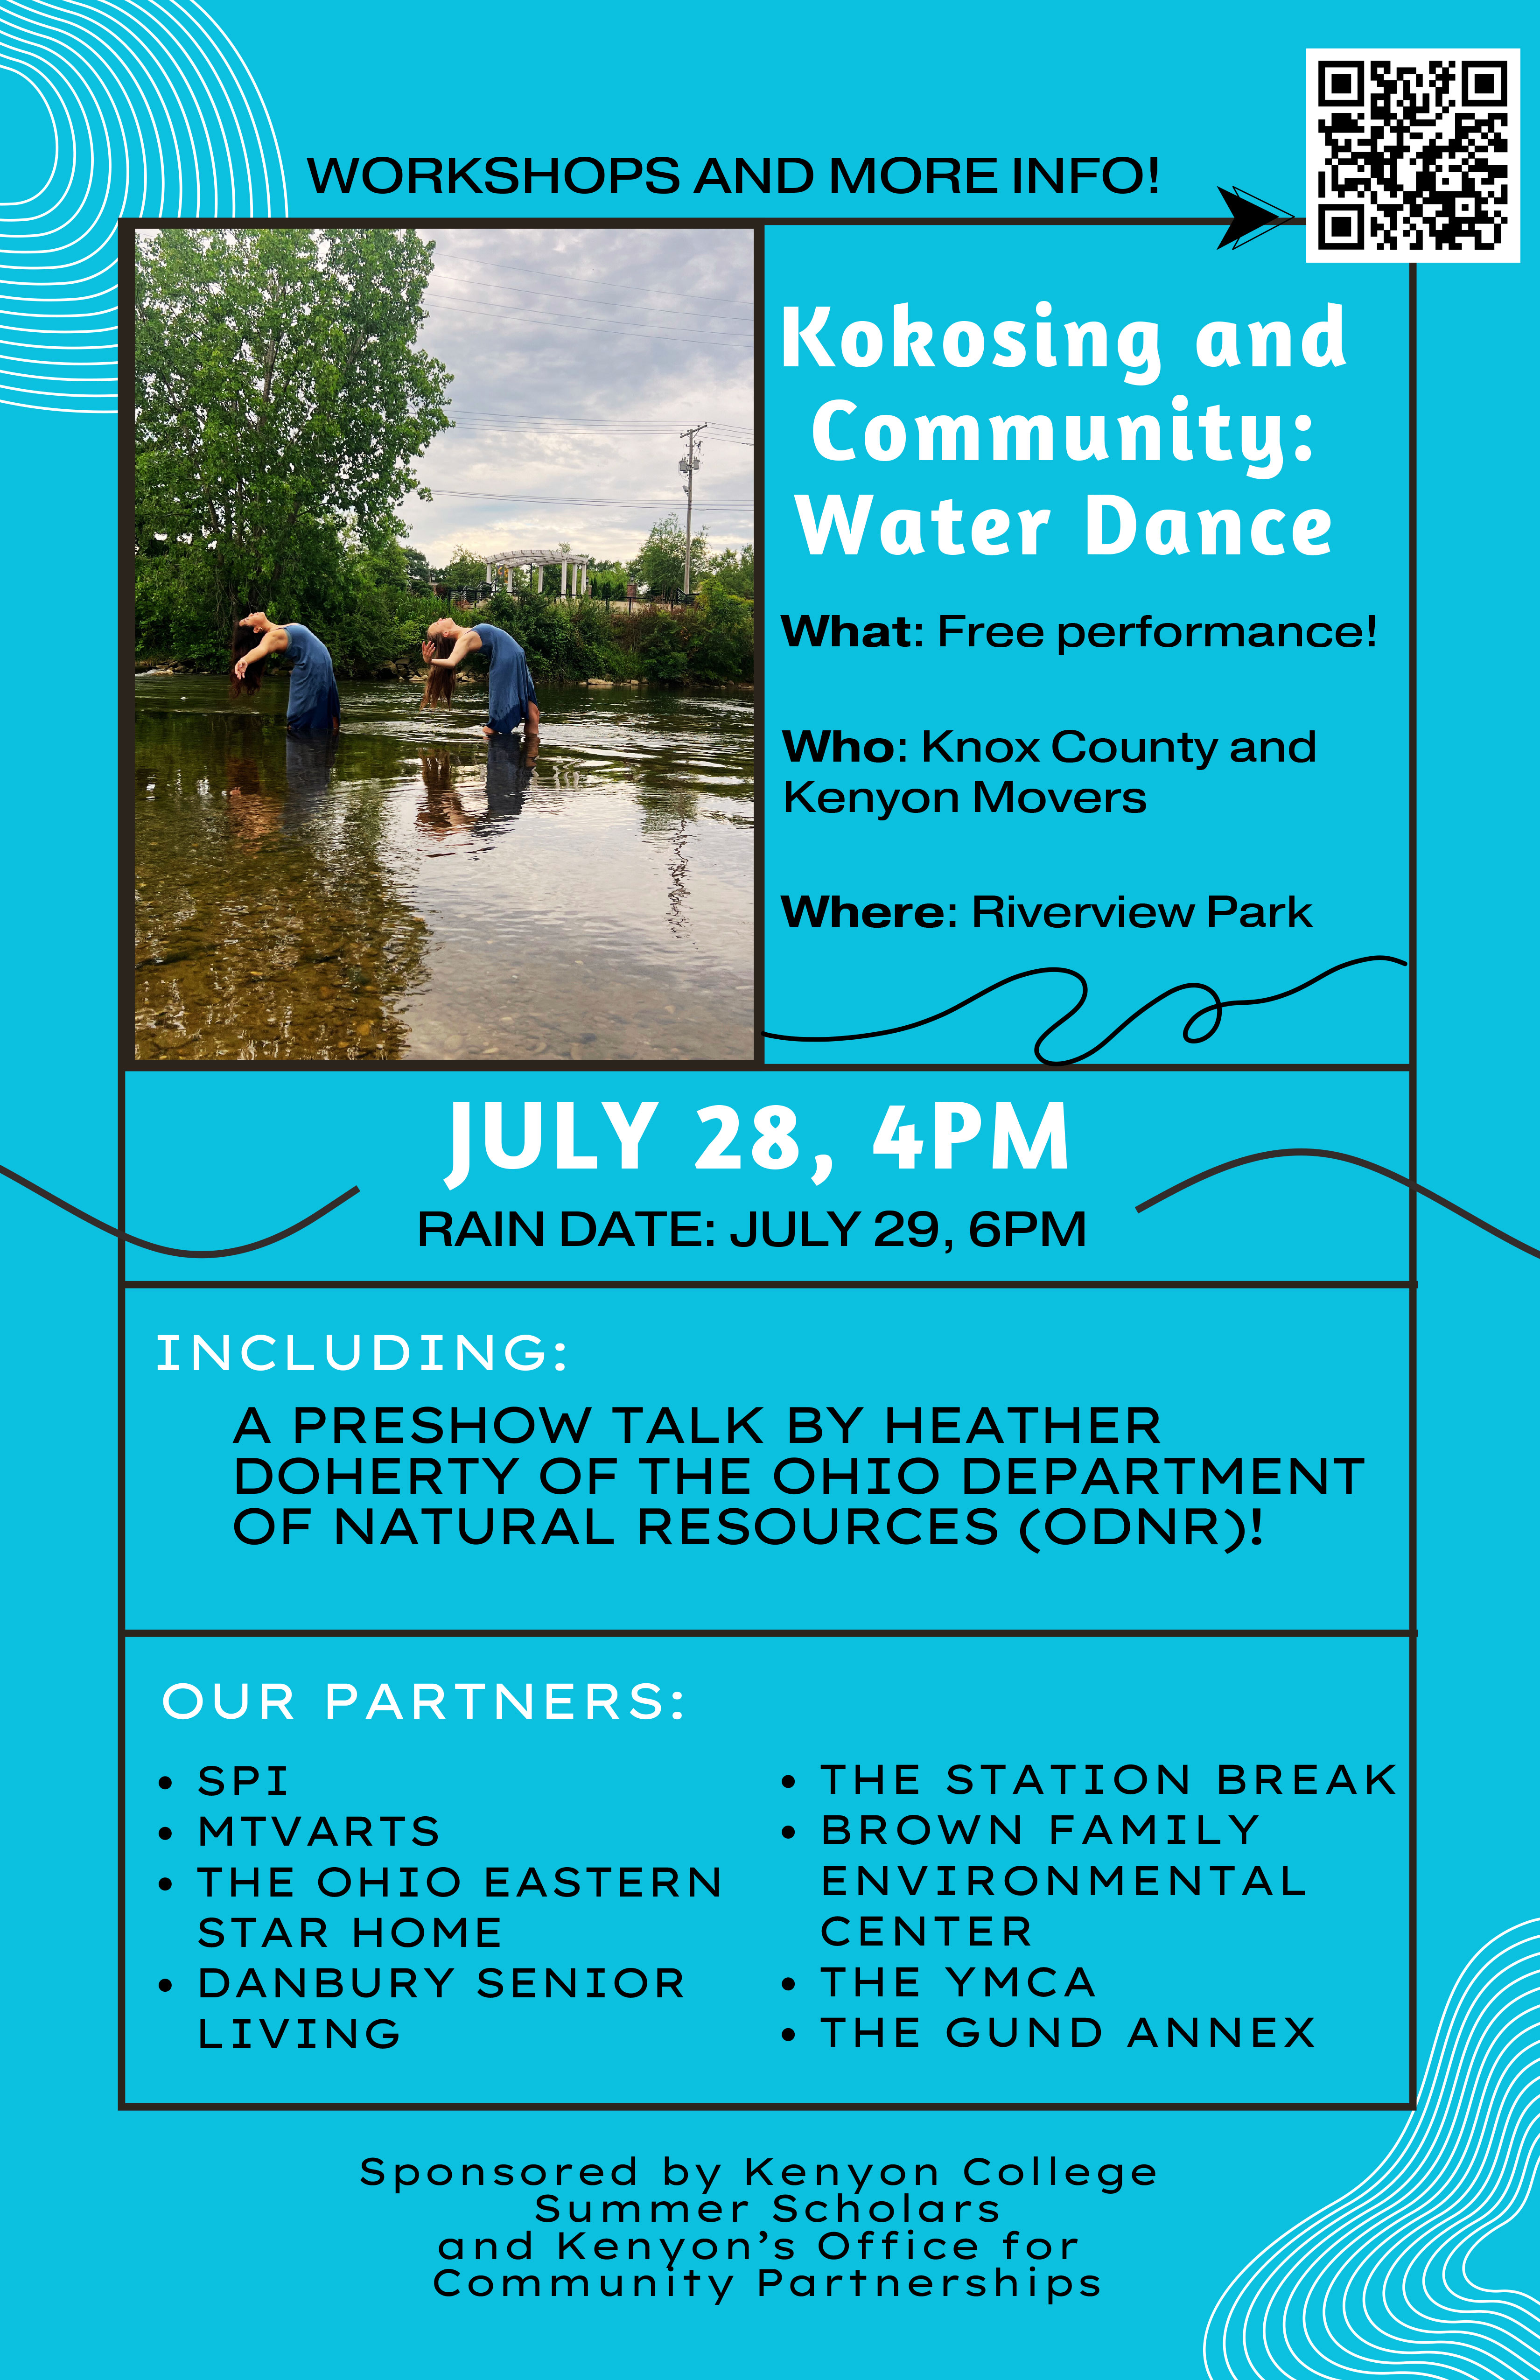 Water dance event poster